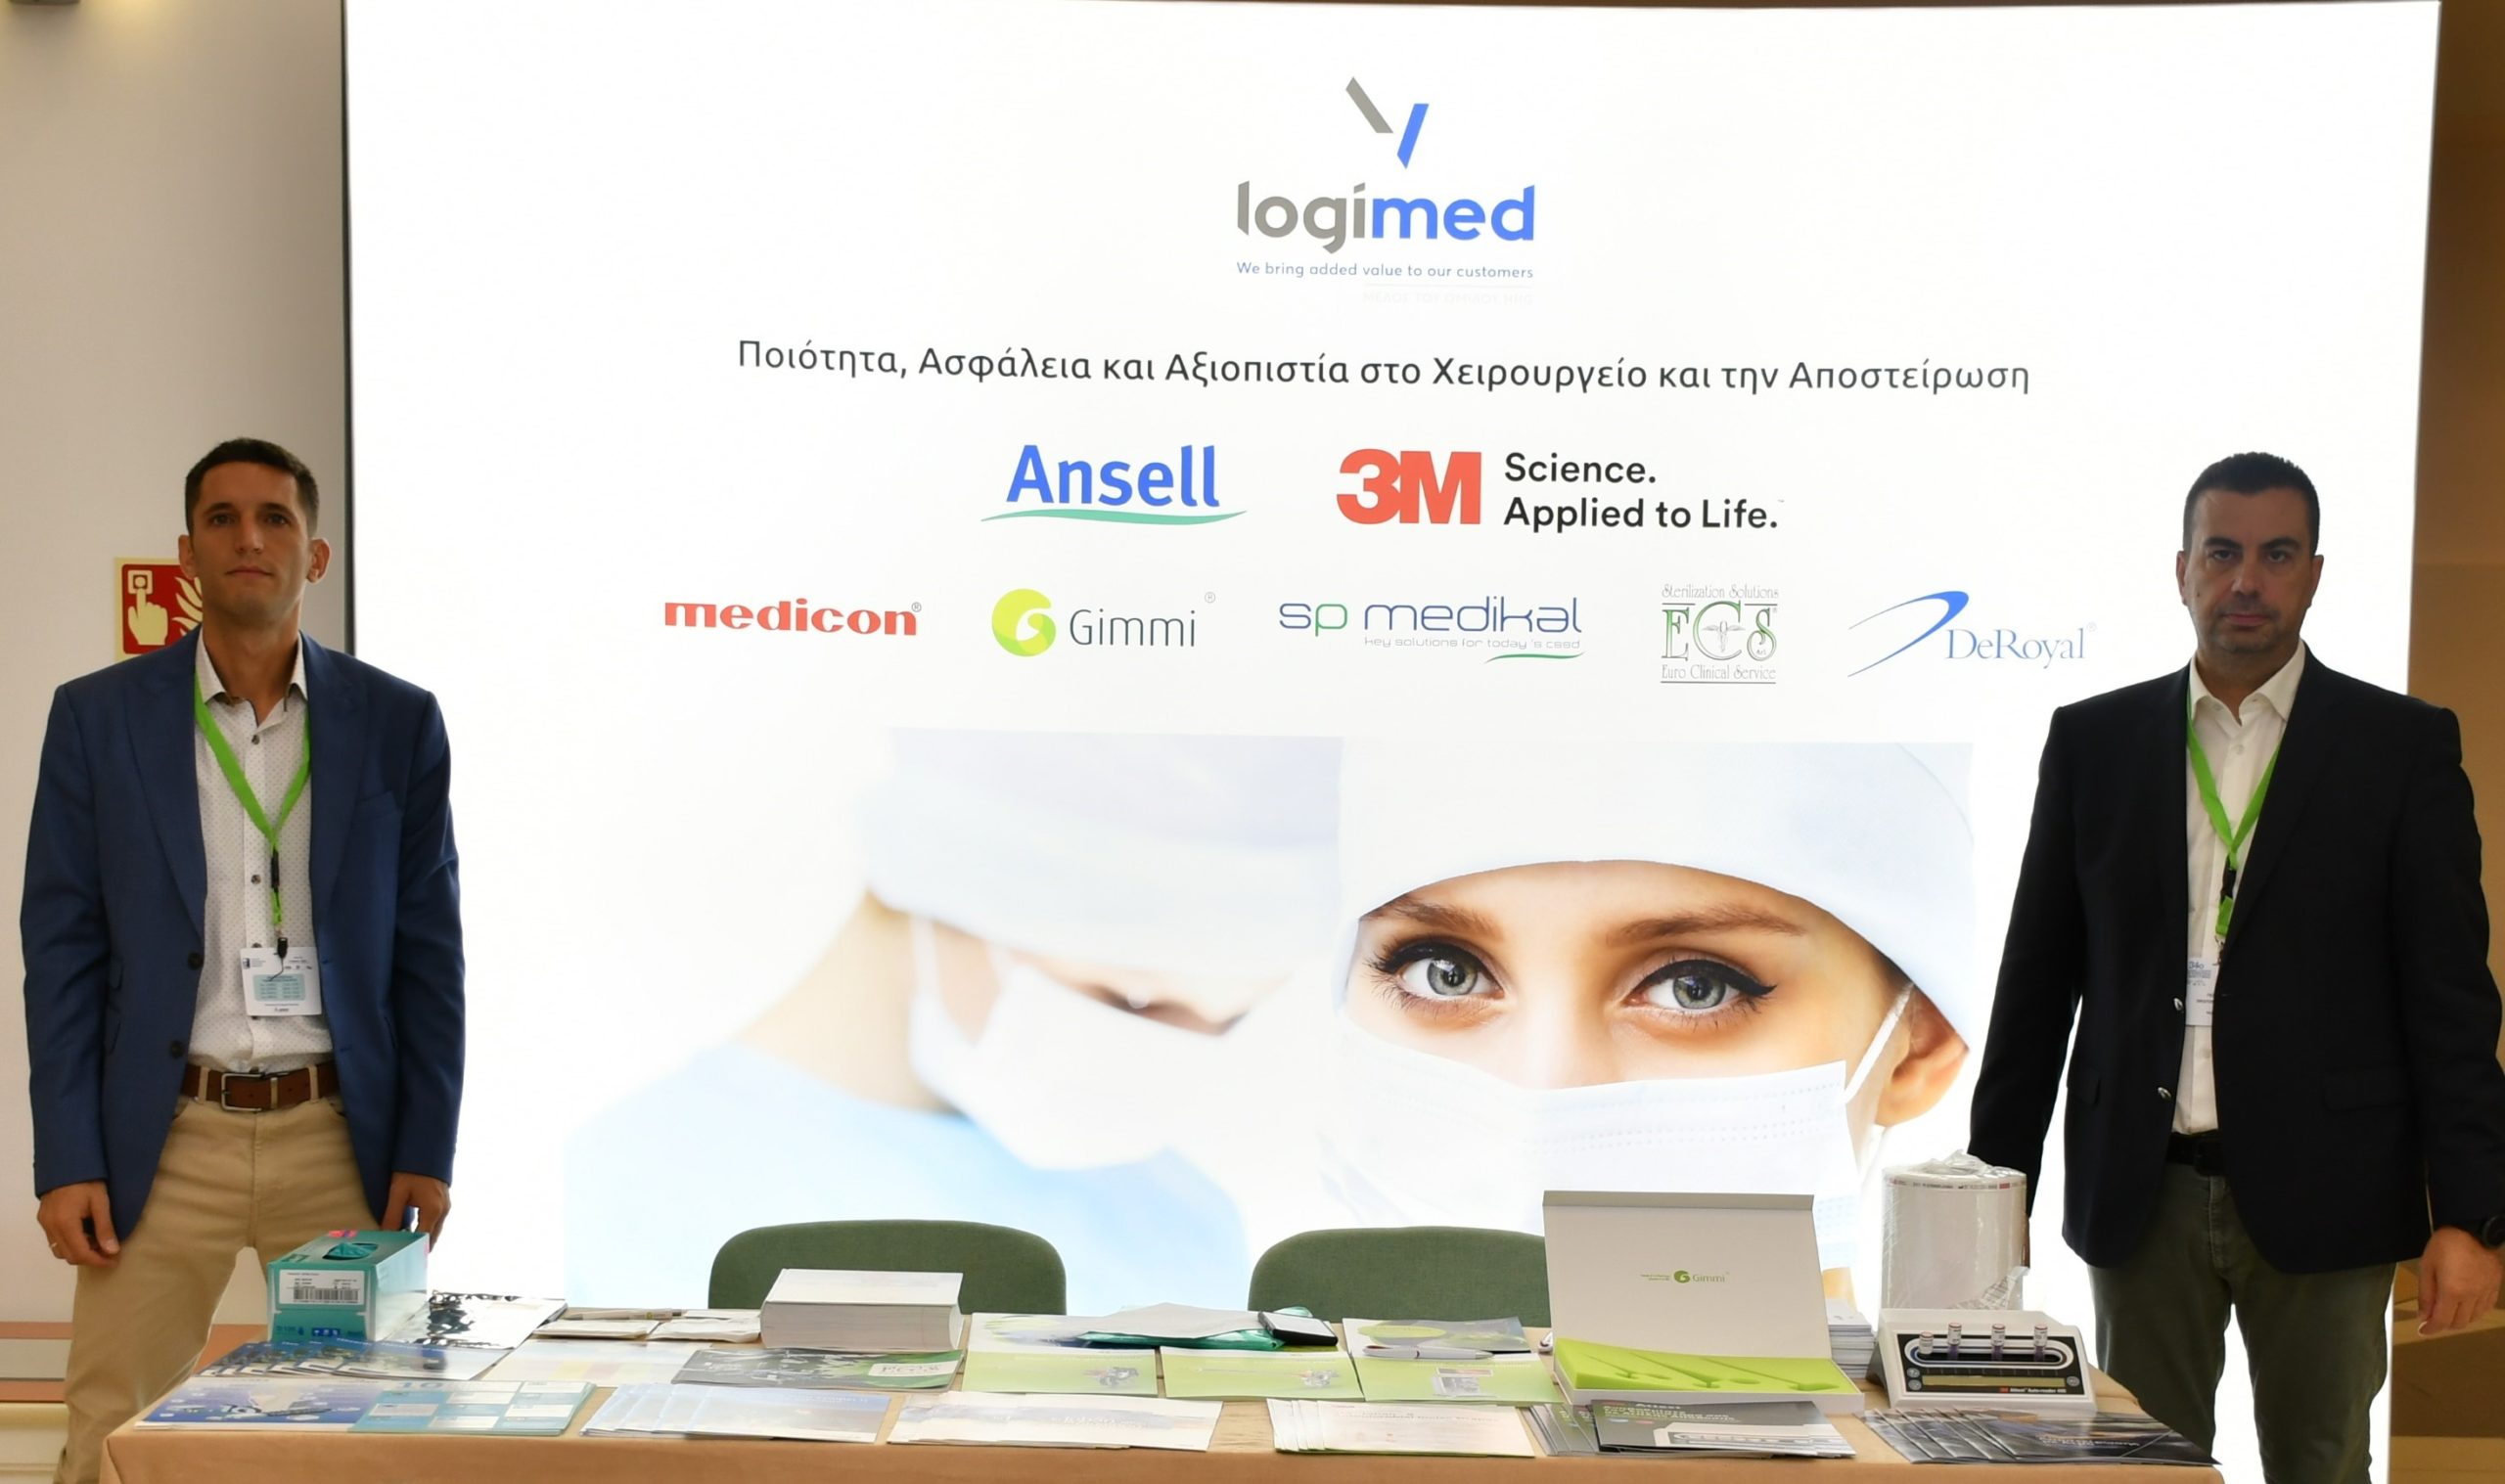 Y-Logimed participated in the scientific support of the 34th Panhellenic Conference on Perioperative Nursing on September 21-24, in Kos Island.